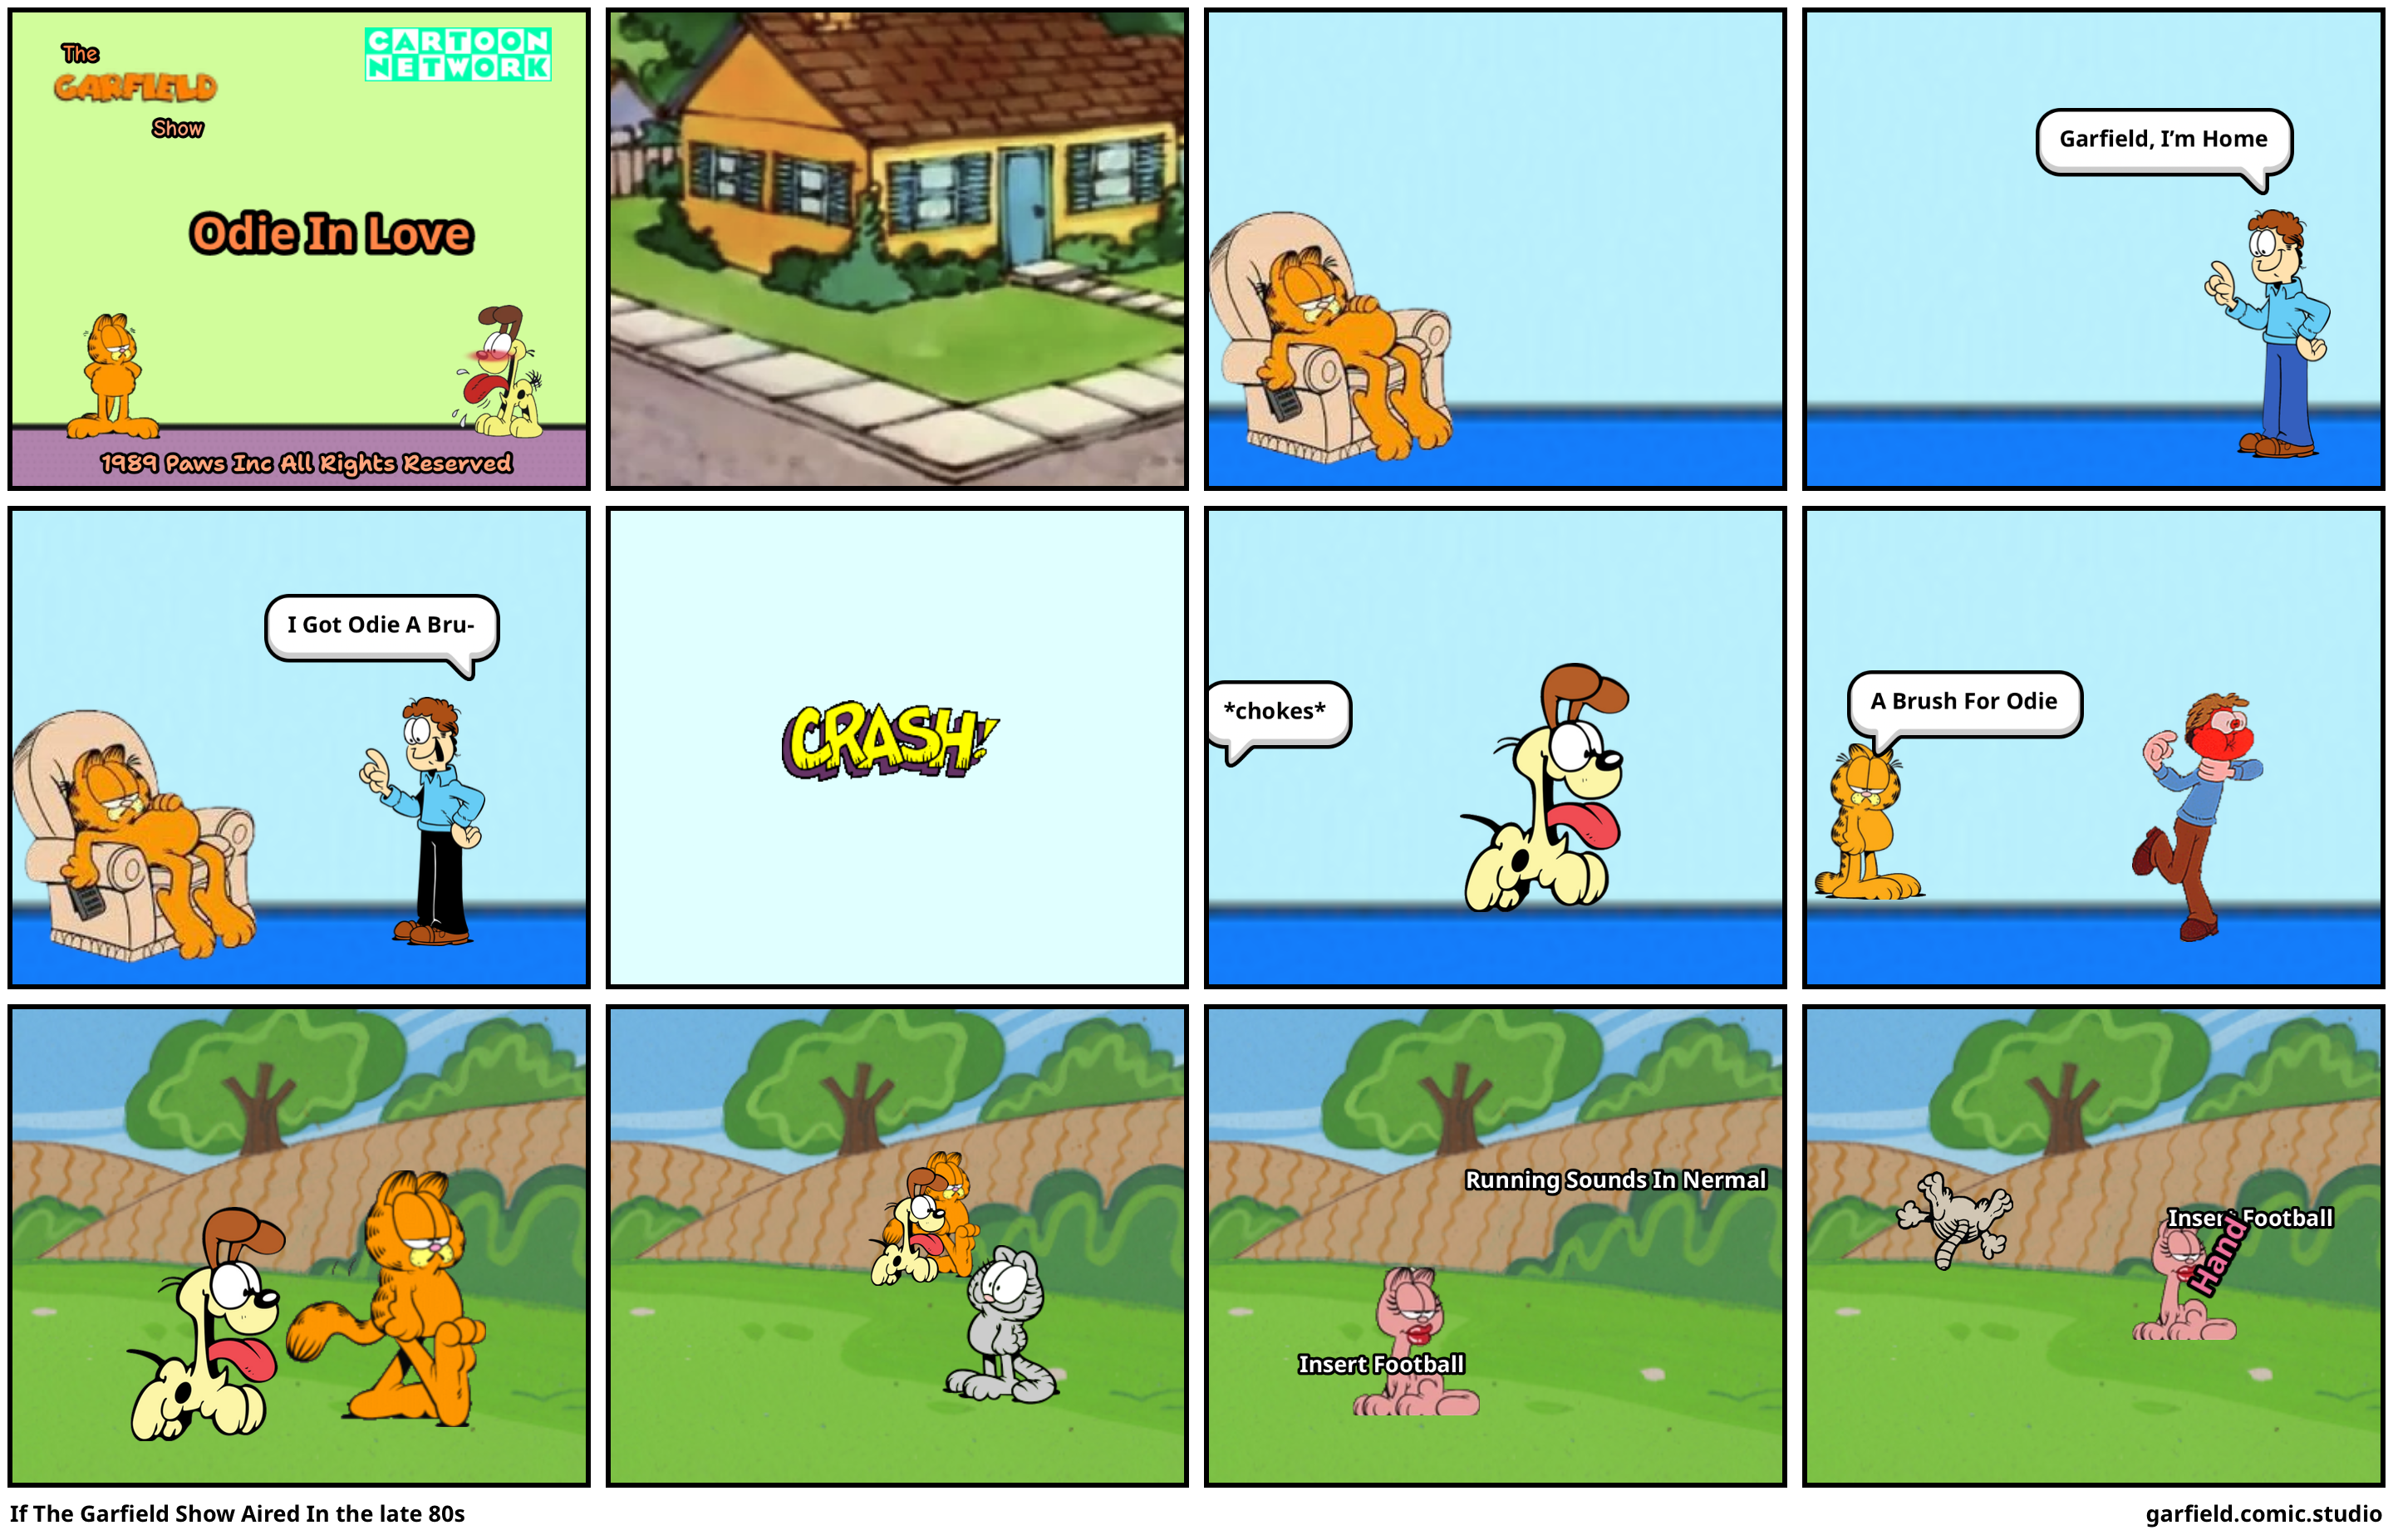 If The Garfield Show Aired In the late 80s 